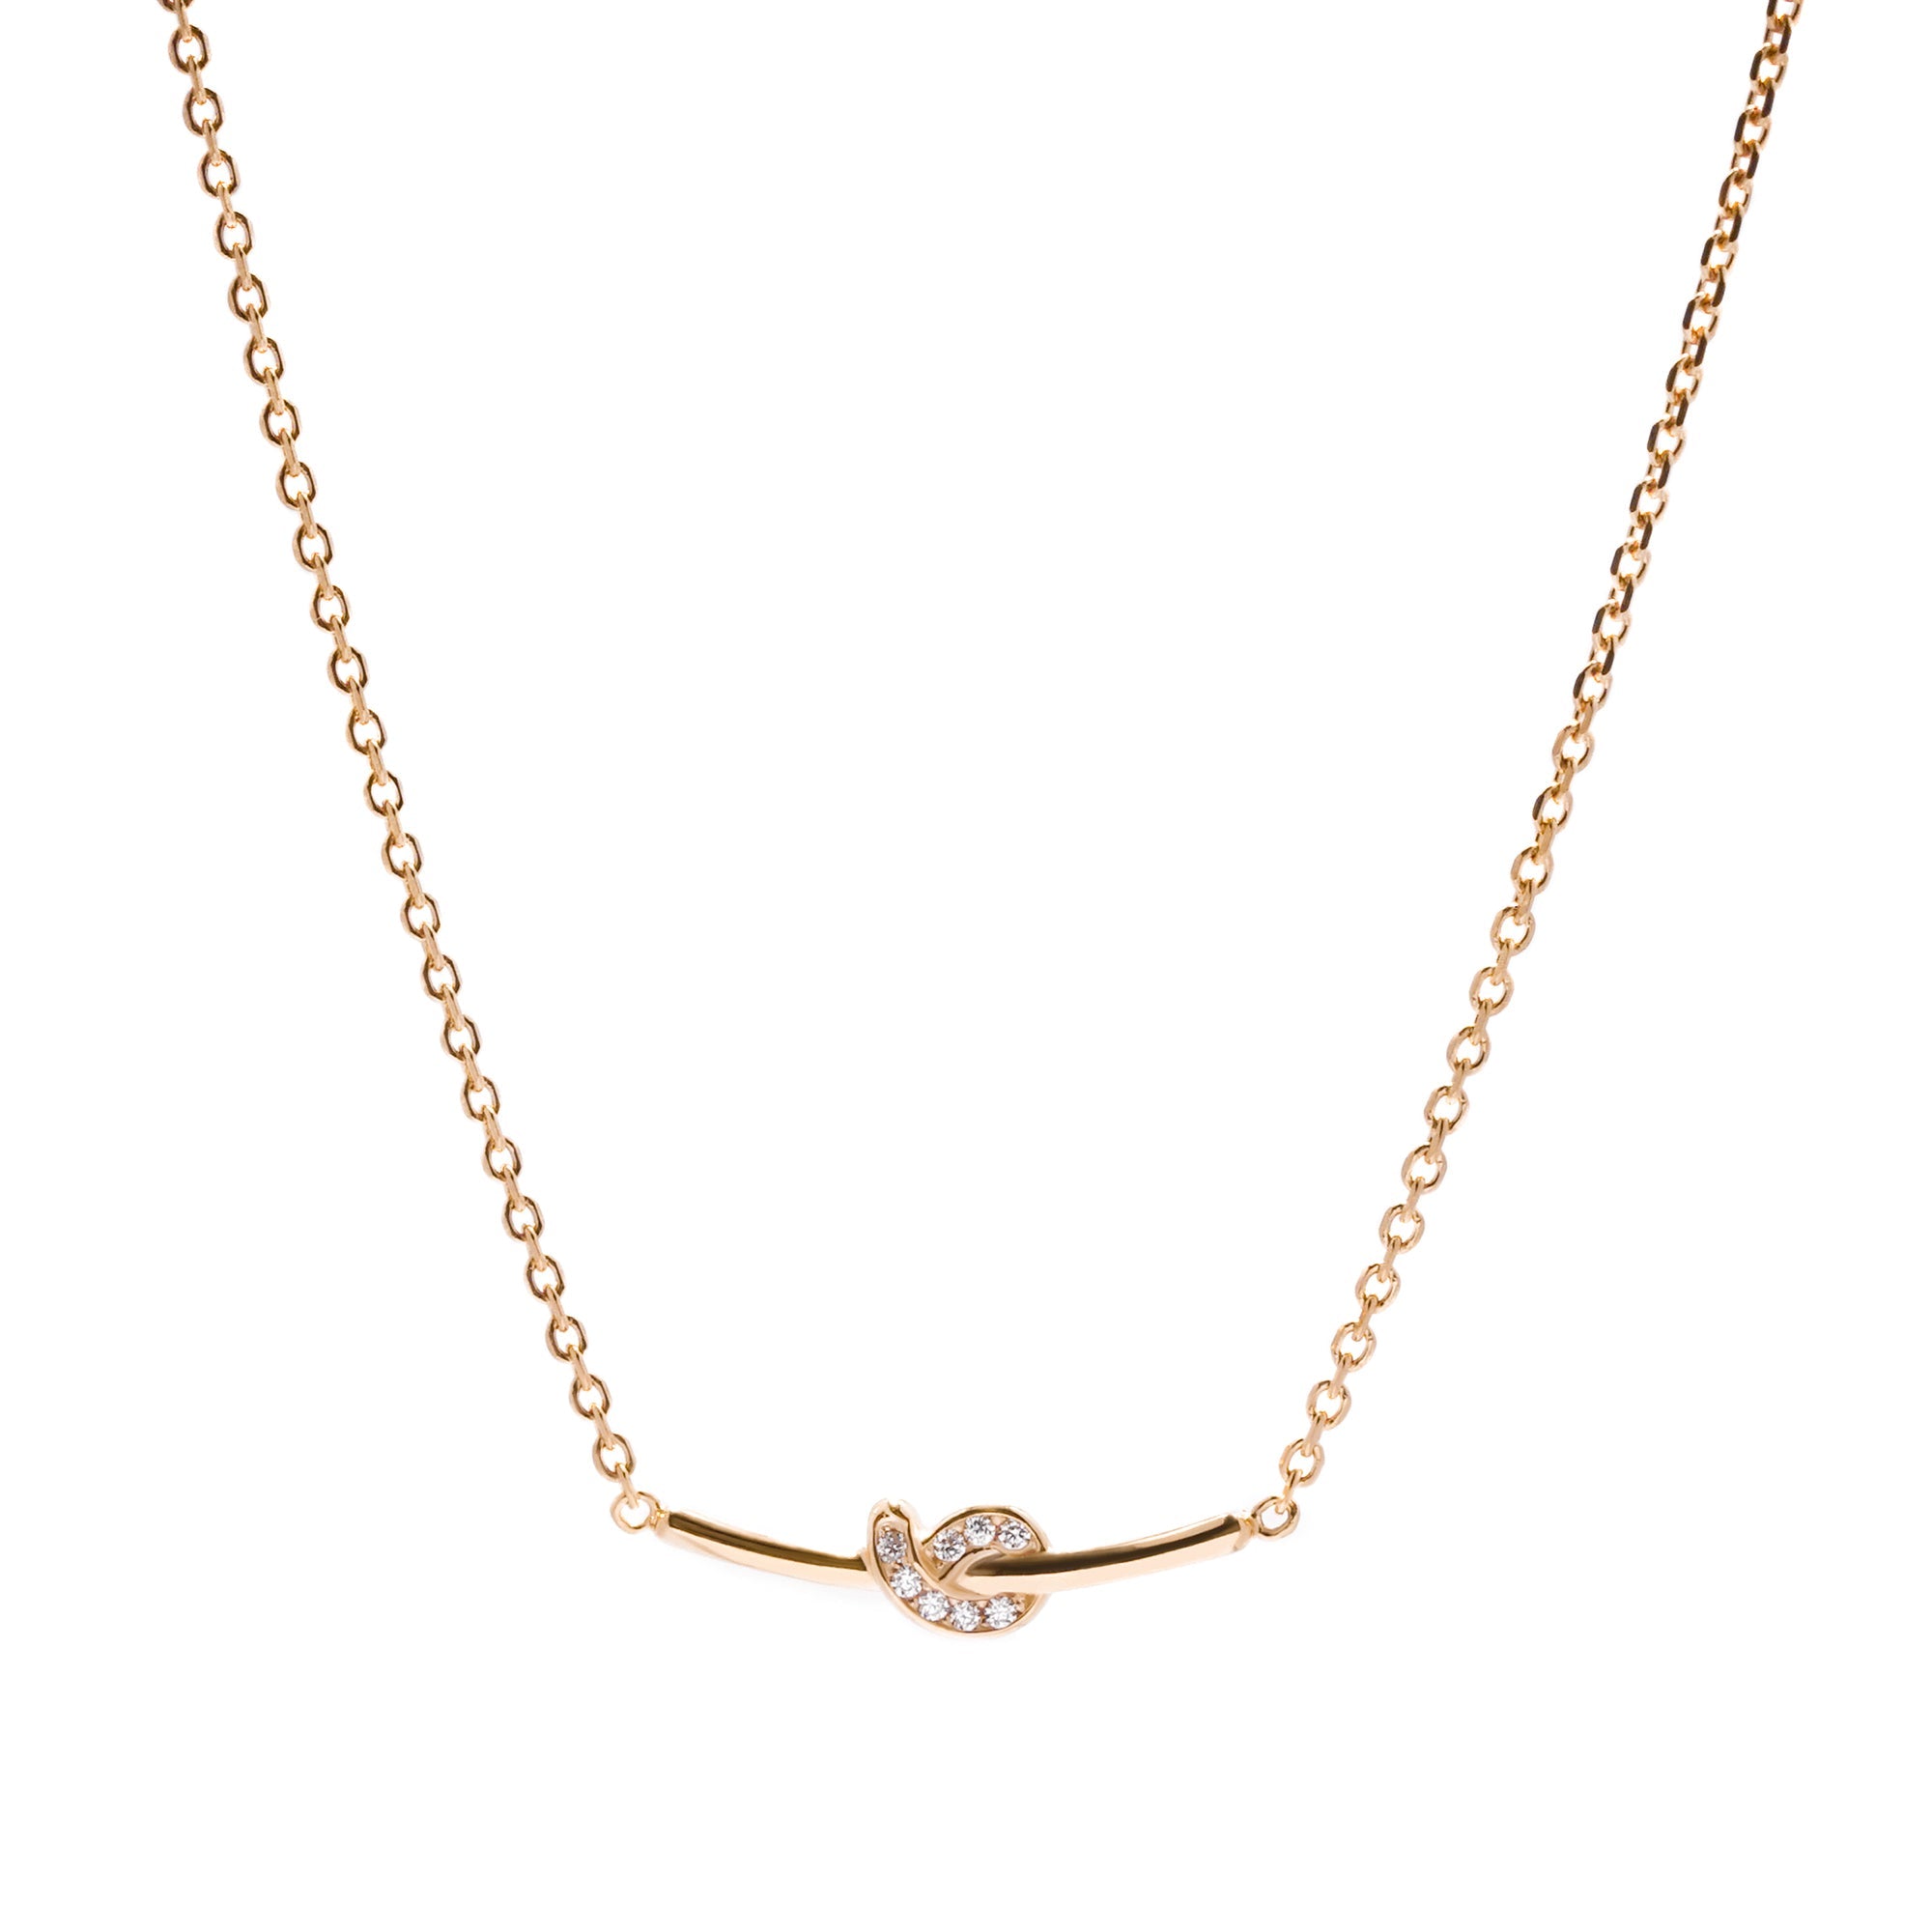 Loop Gold Necklace - Twine Collection - Juene Jewelry